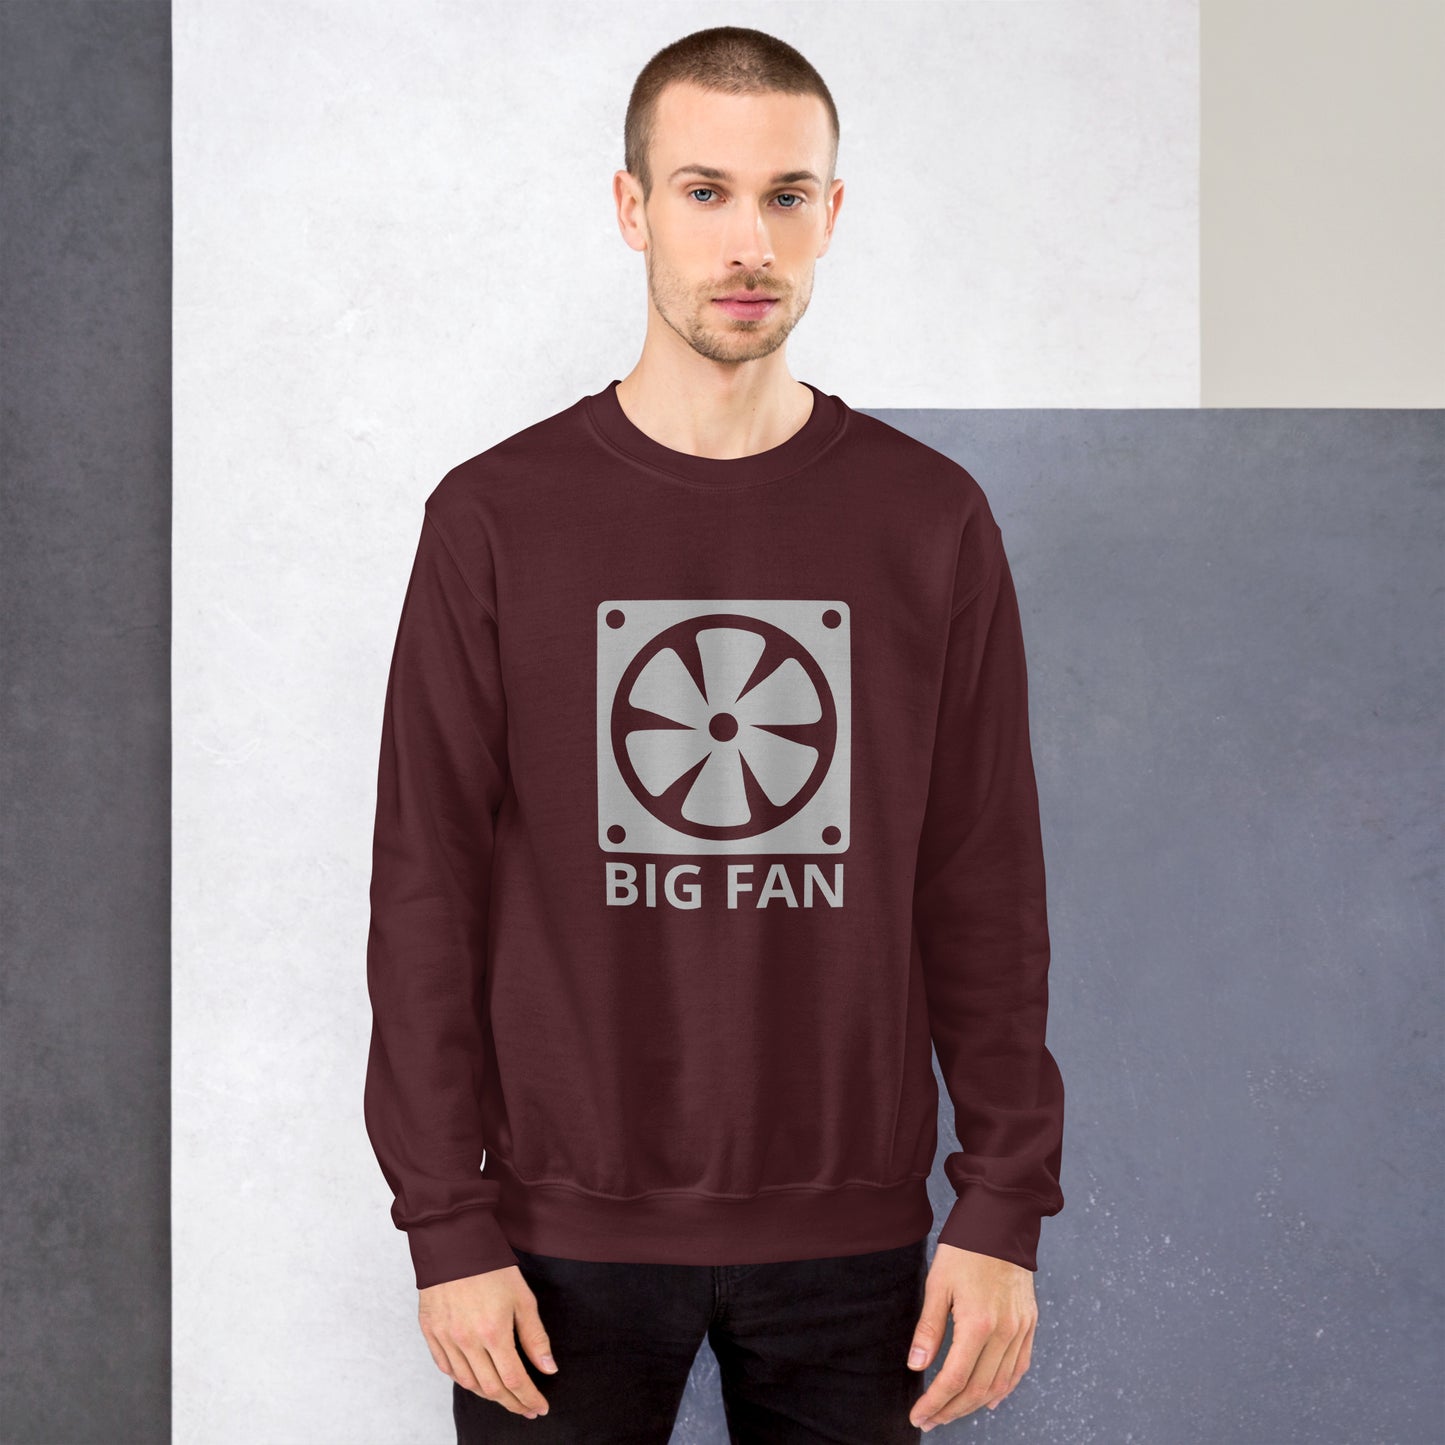 Men with maroon sweatshirt with image of a big computer fan and the text "BIG FAN"